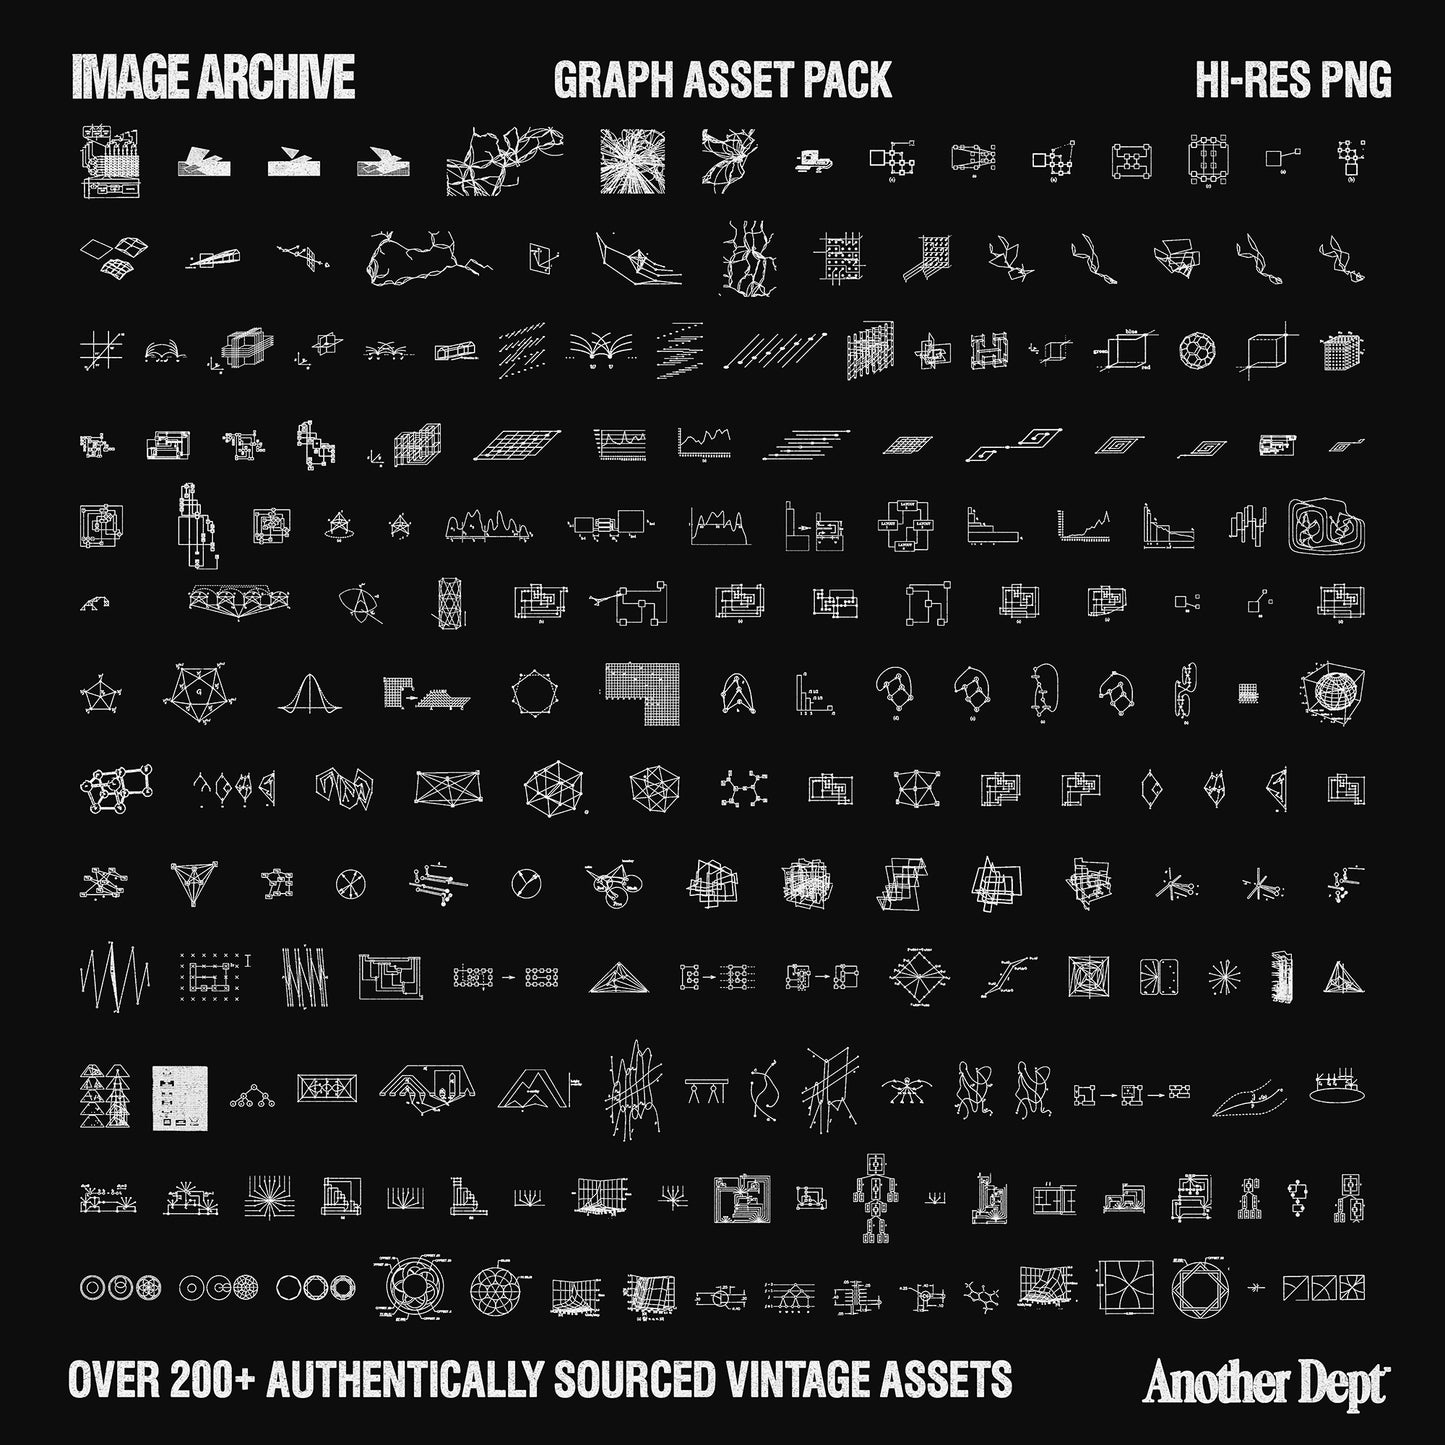 GRAPHS ASSET PACK - Over 200+ Graphics + Icons